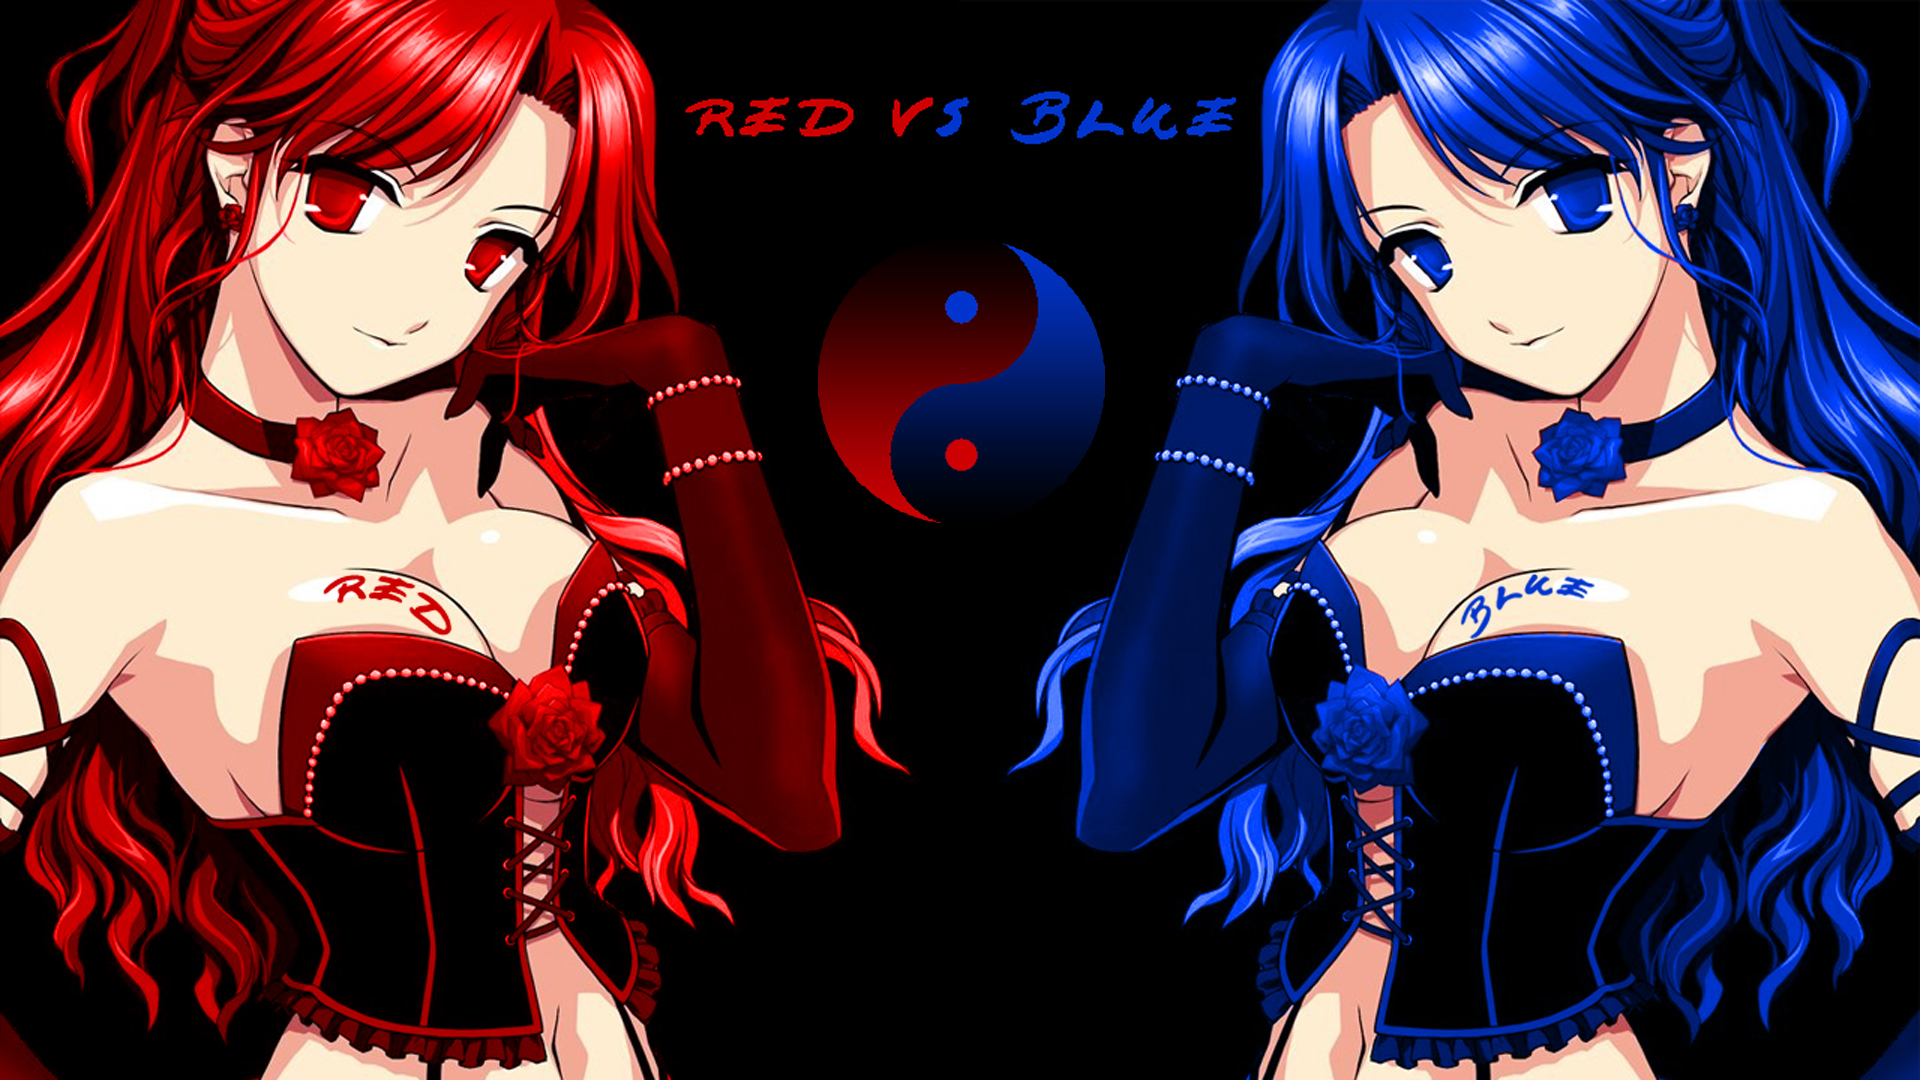 Red_VS_Blue_1920x1080_by_edualcp.jpg